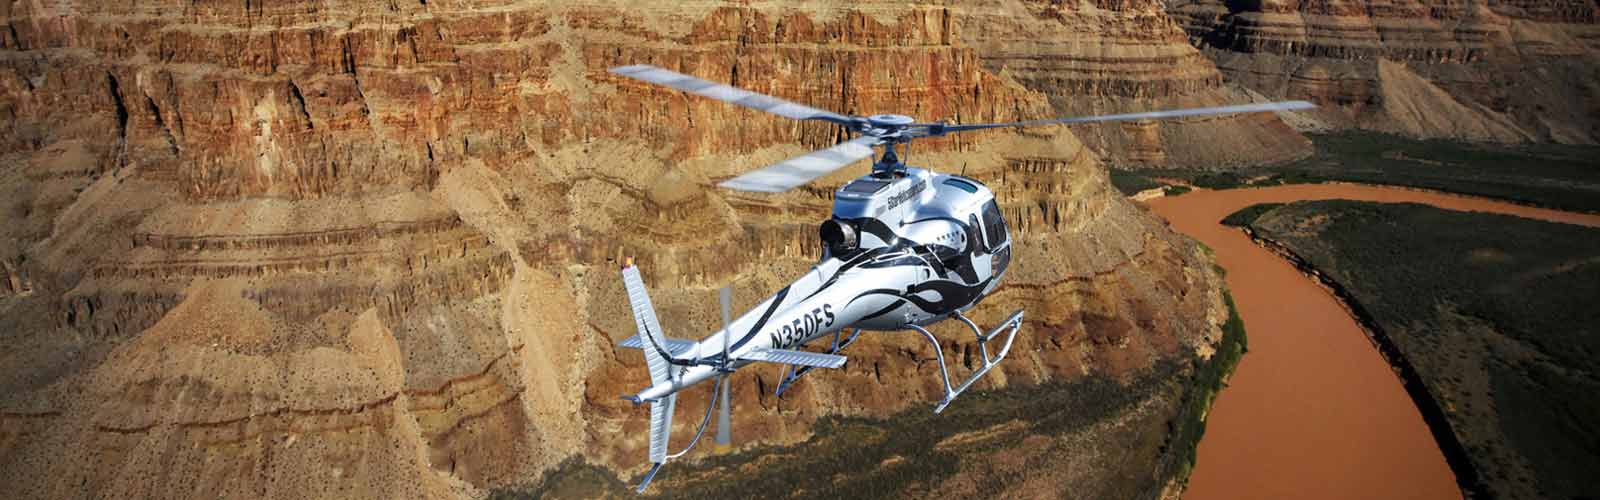 grand-canyon-en-helicoptere